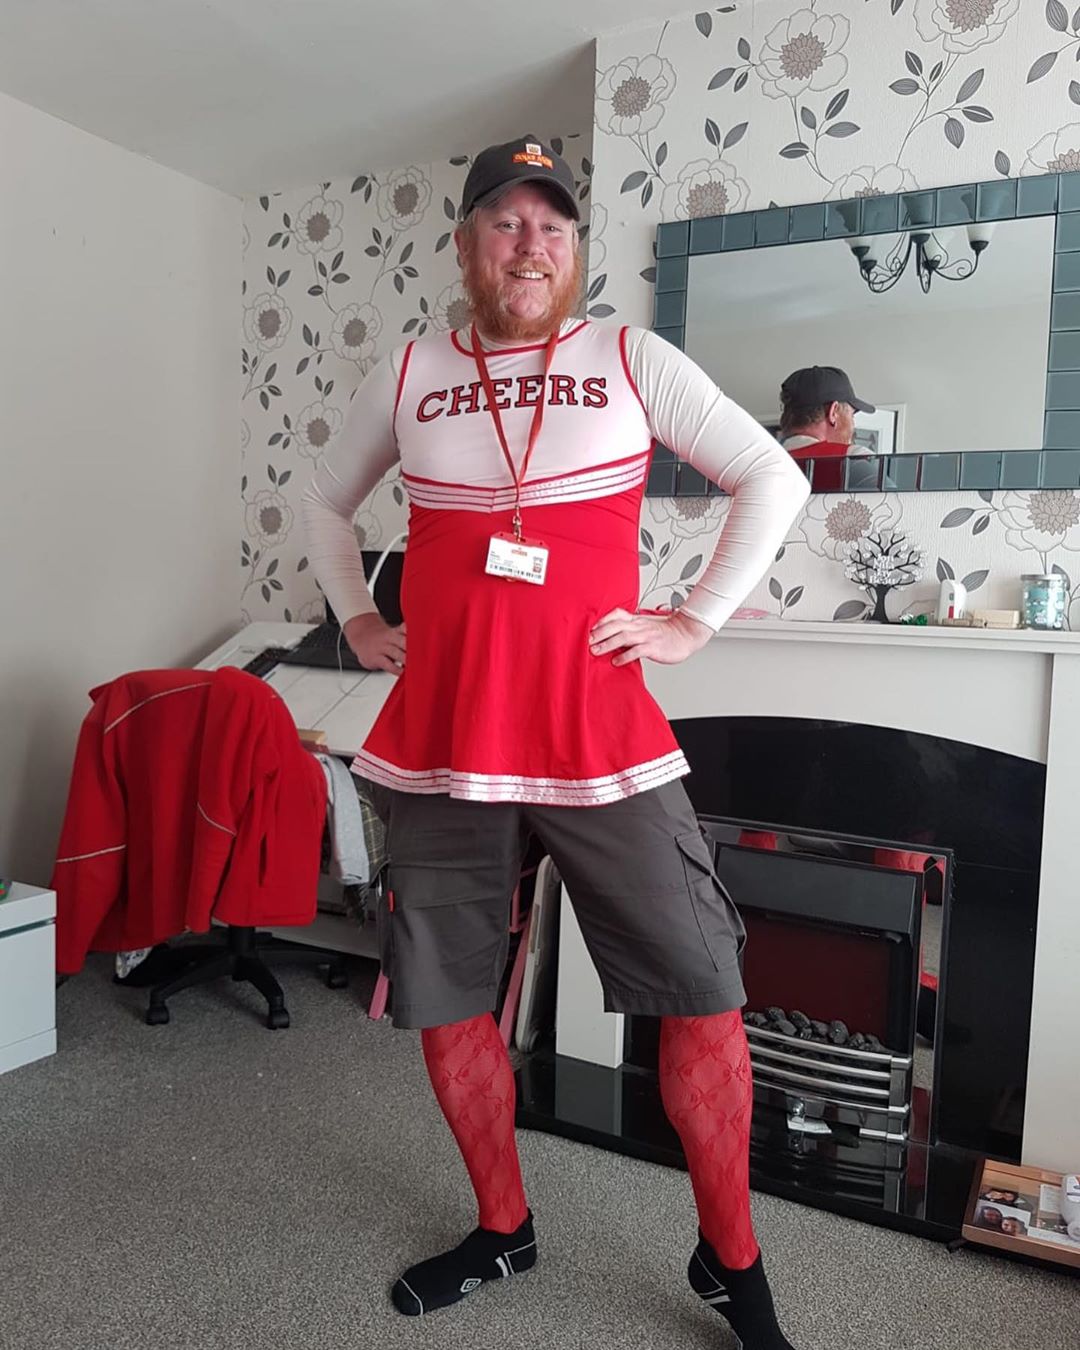 English Postman Dresses Up In Costumes To Lift Community Spirit During COVID-19 Lockdown